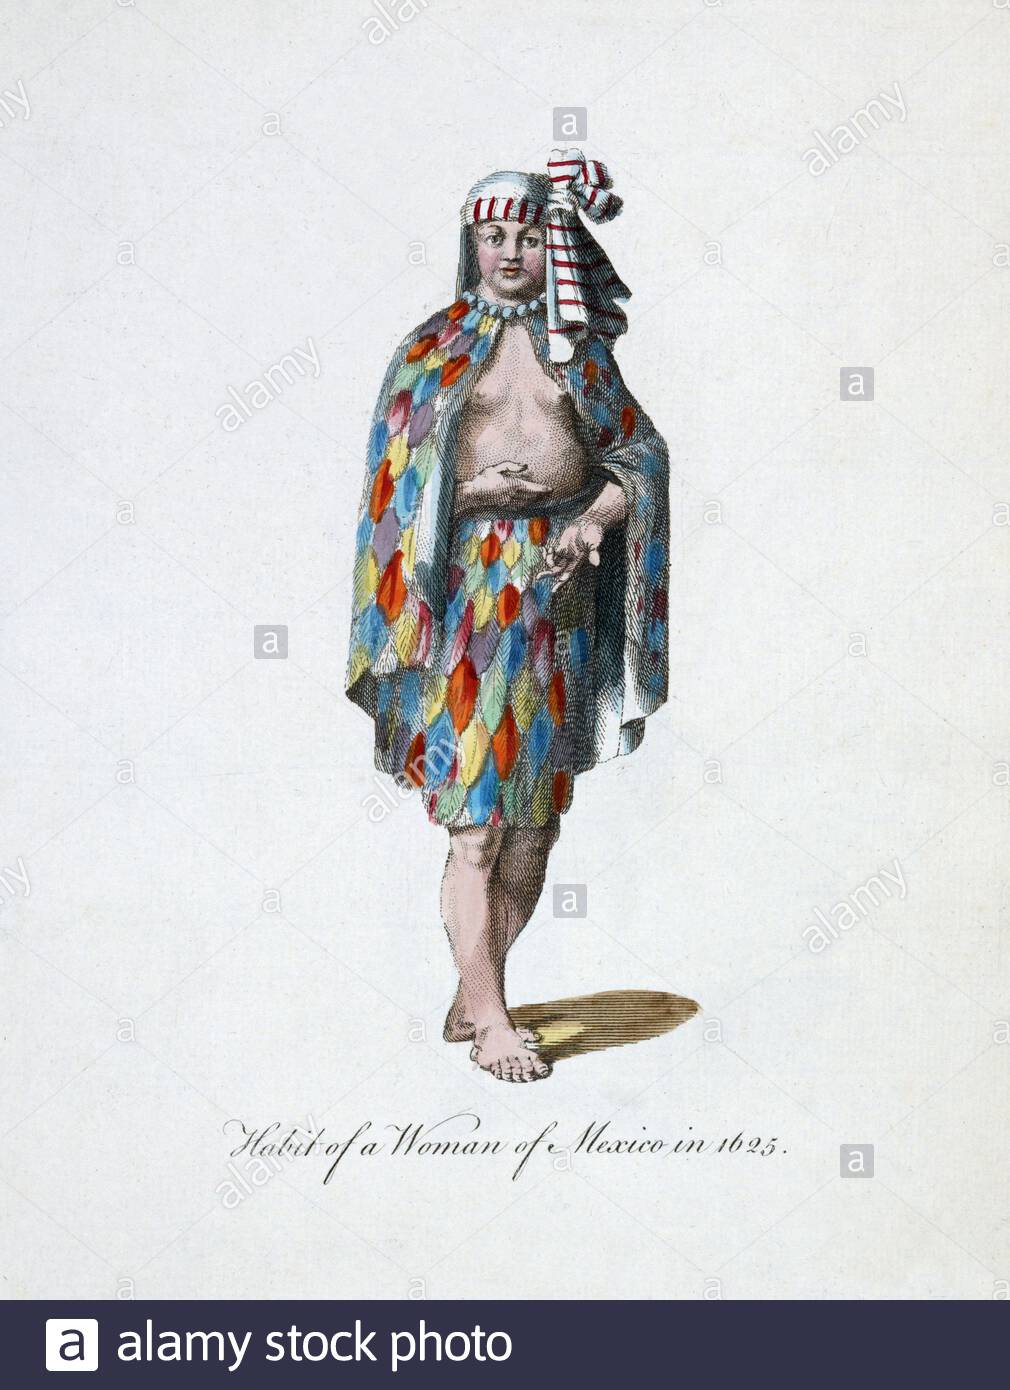 Habit of a woman of Mexico in 1625, vintage illustration from the 1700s Stock Photo